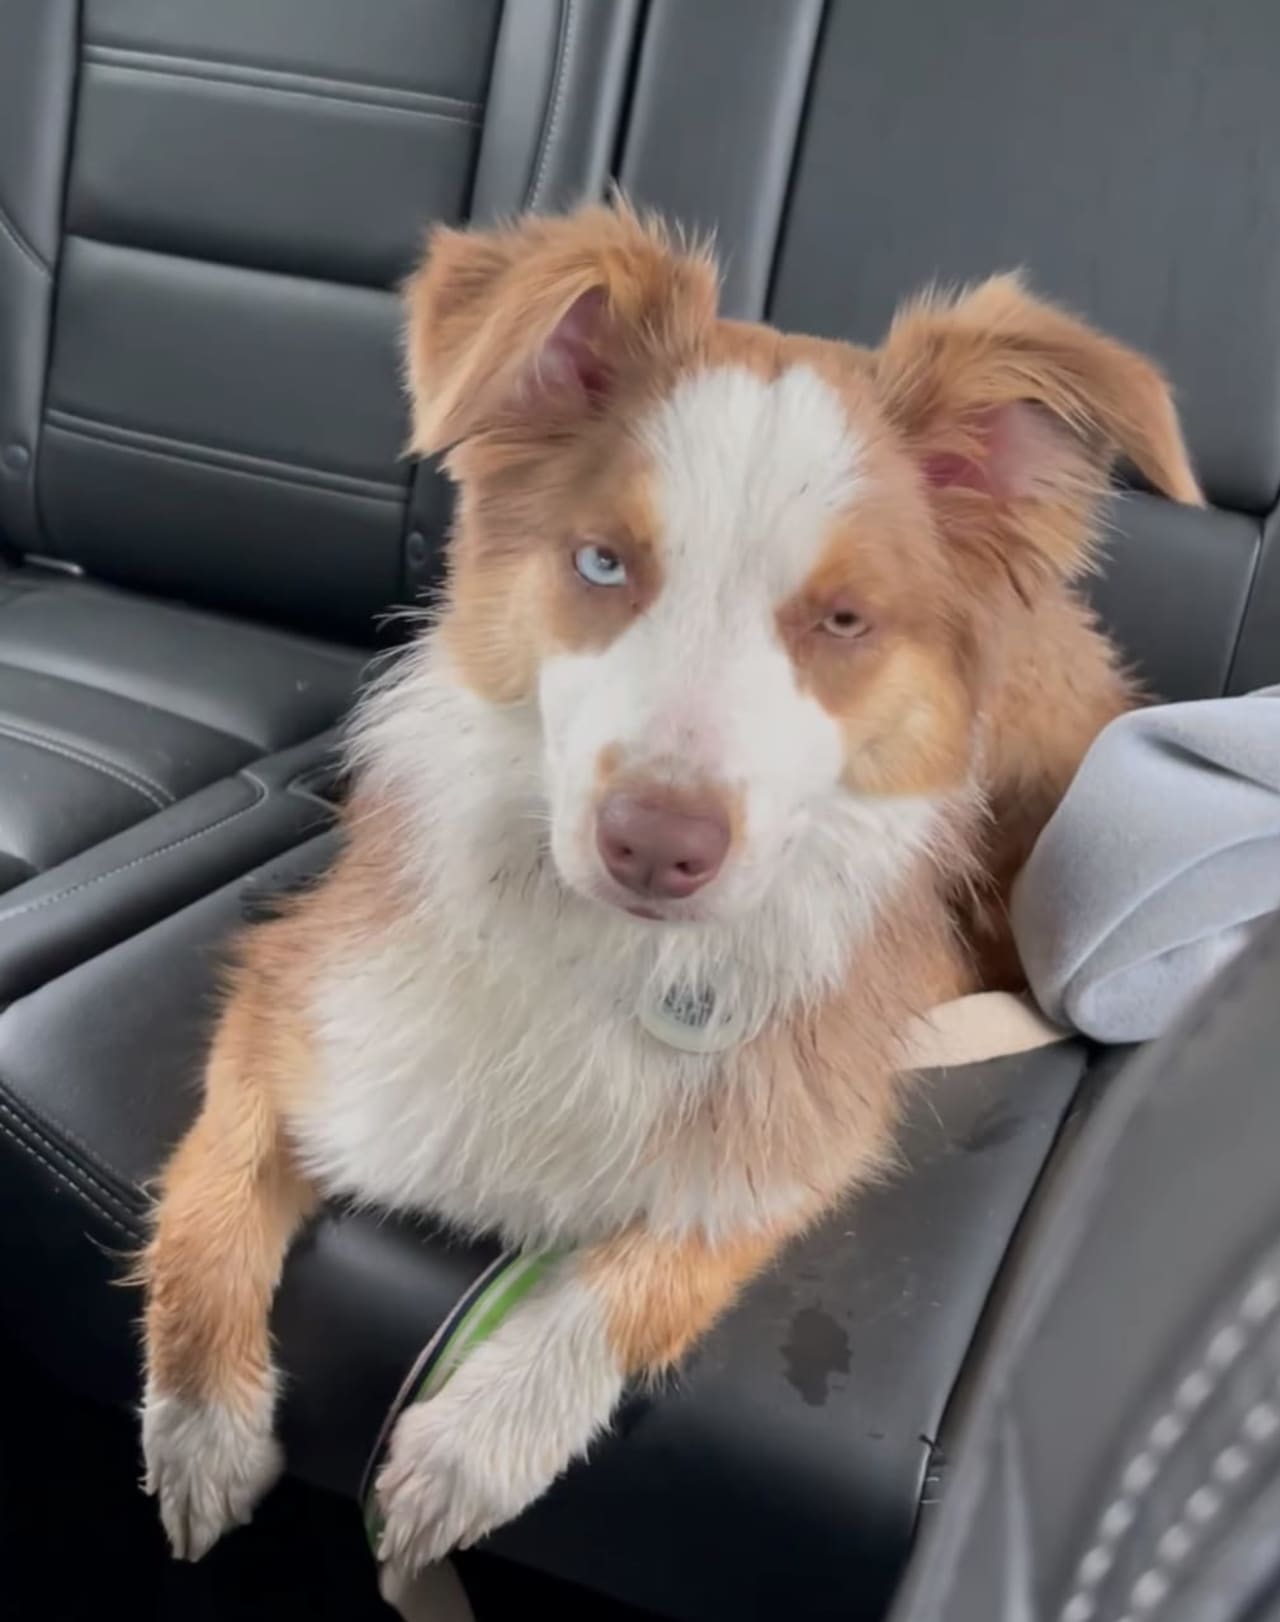 A dog that escaped from a car and ran into the woods after a “horrific” crash on Route 80 has found its way back home thanks to a “huge community effort,” authorities said.